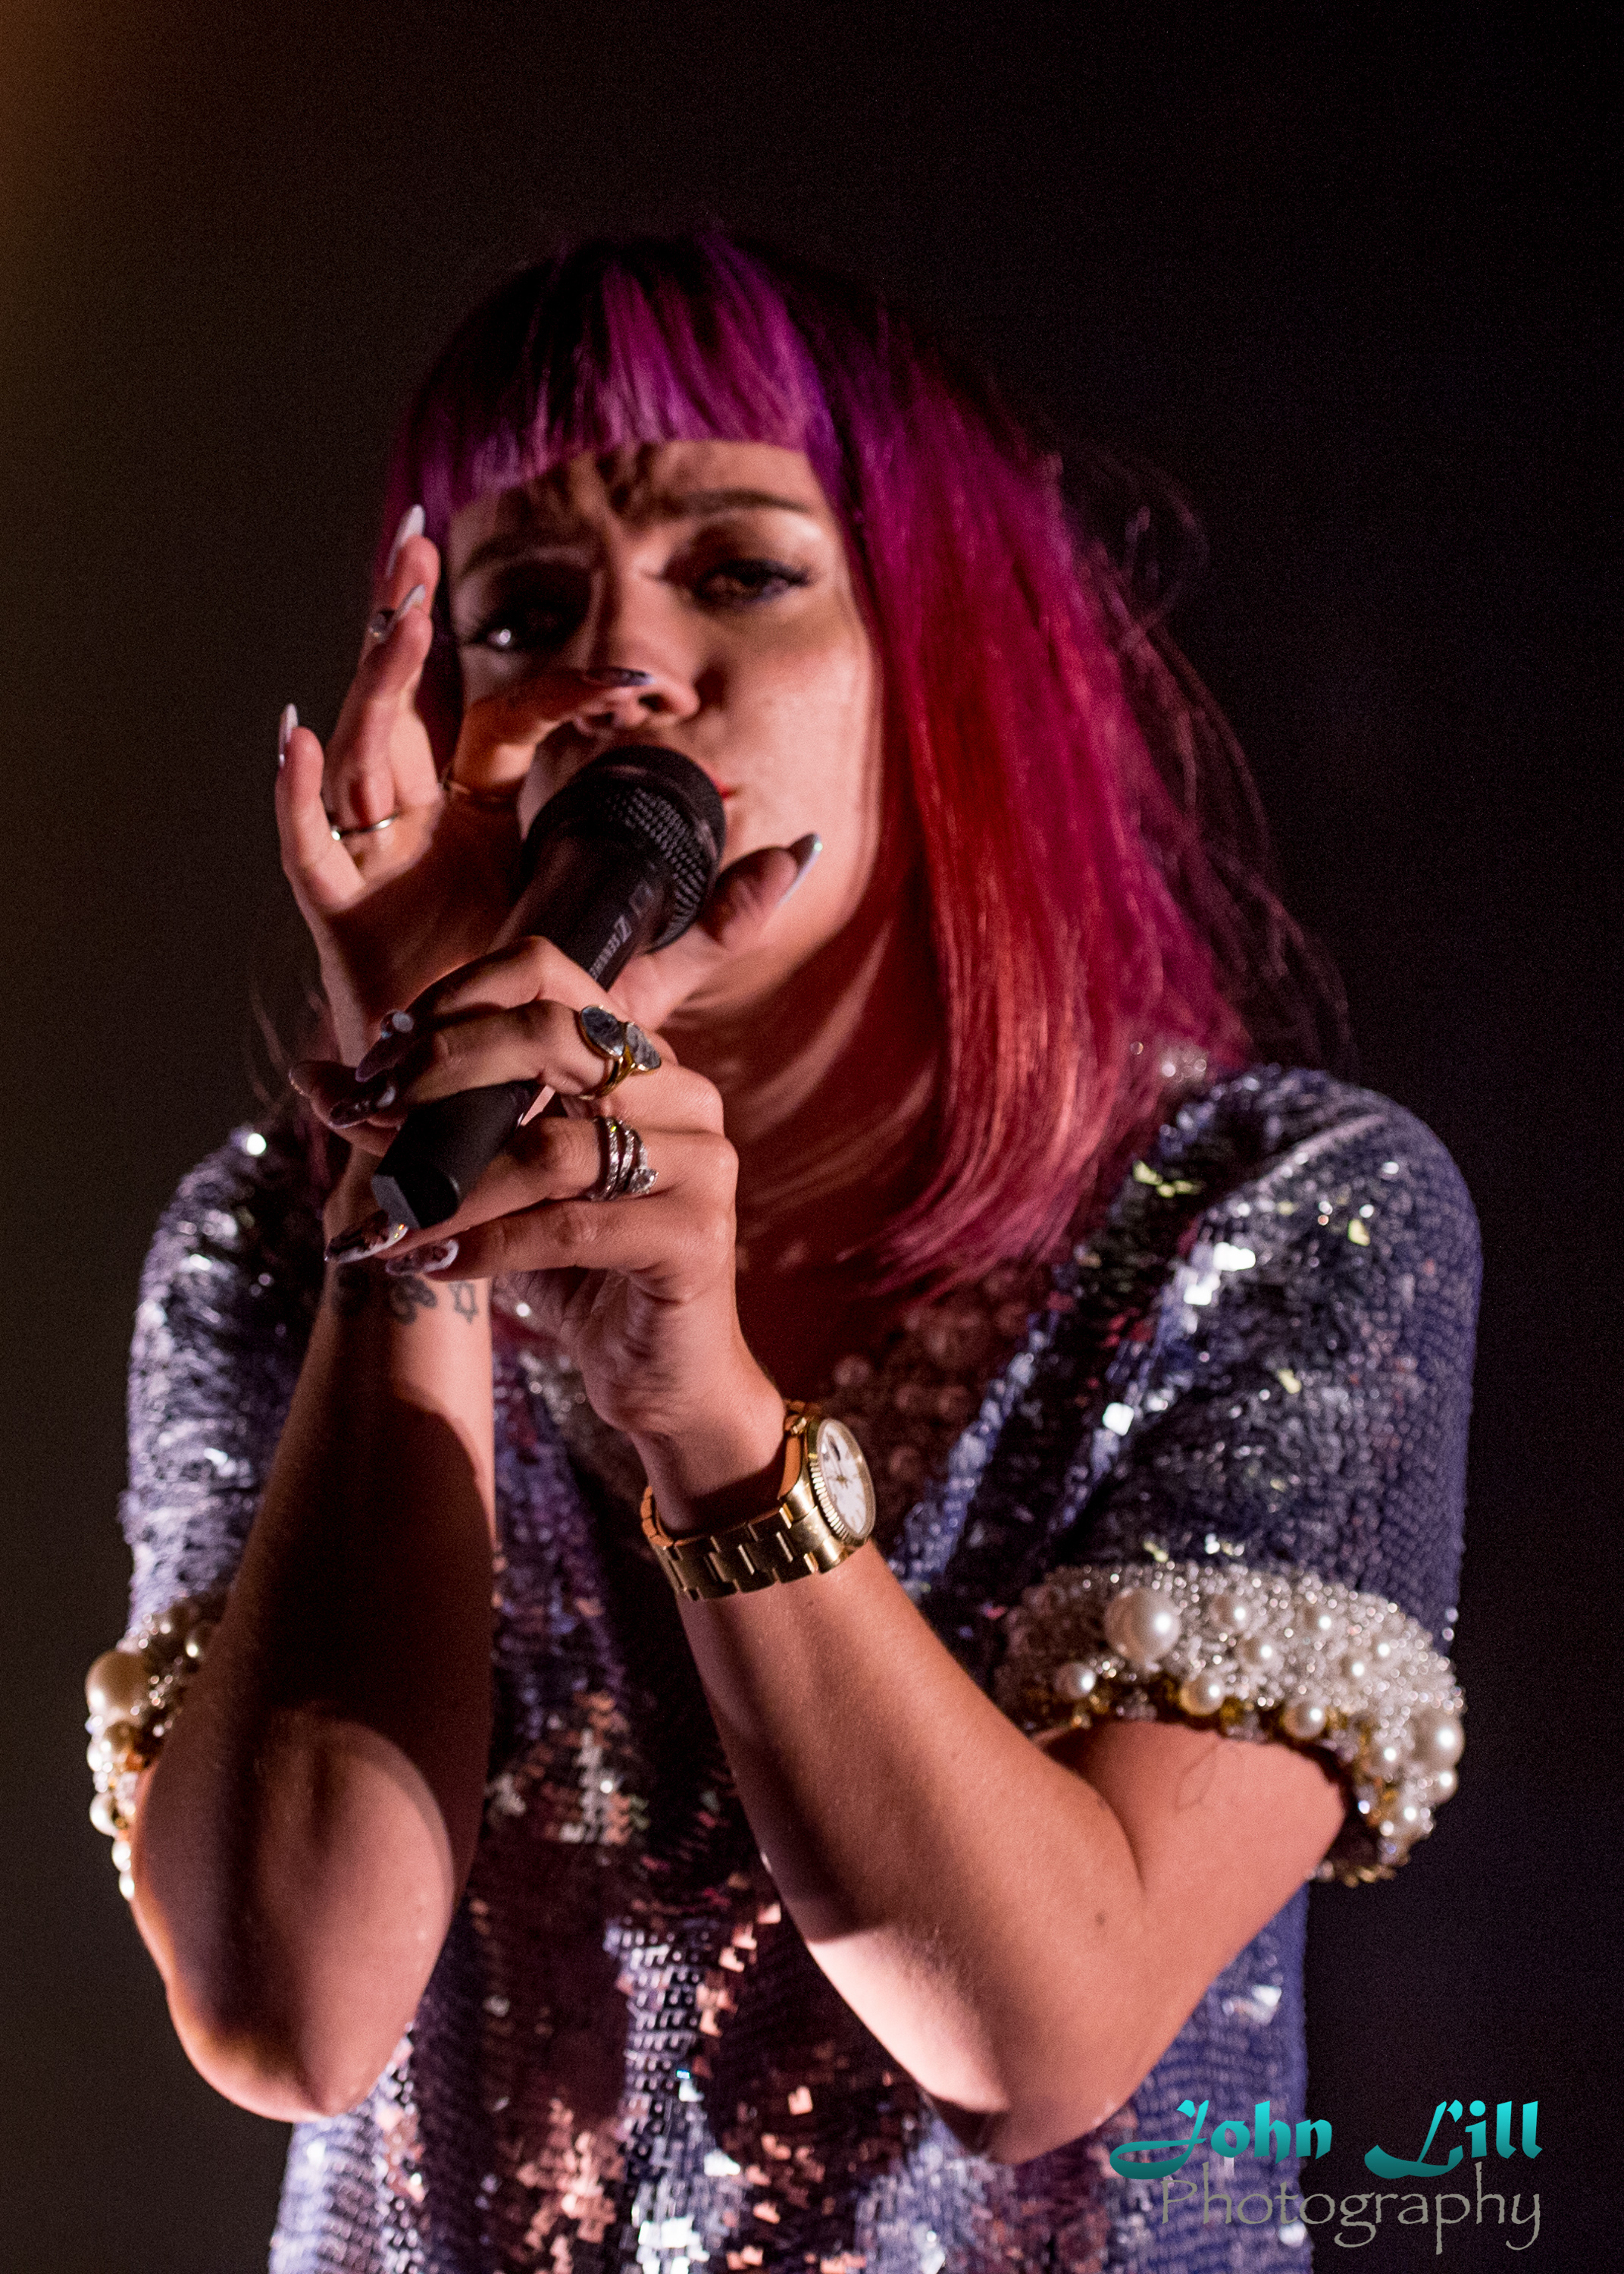 Lily Allen performs at the Paramount Theatre. Photo by John Lill